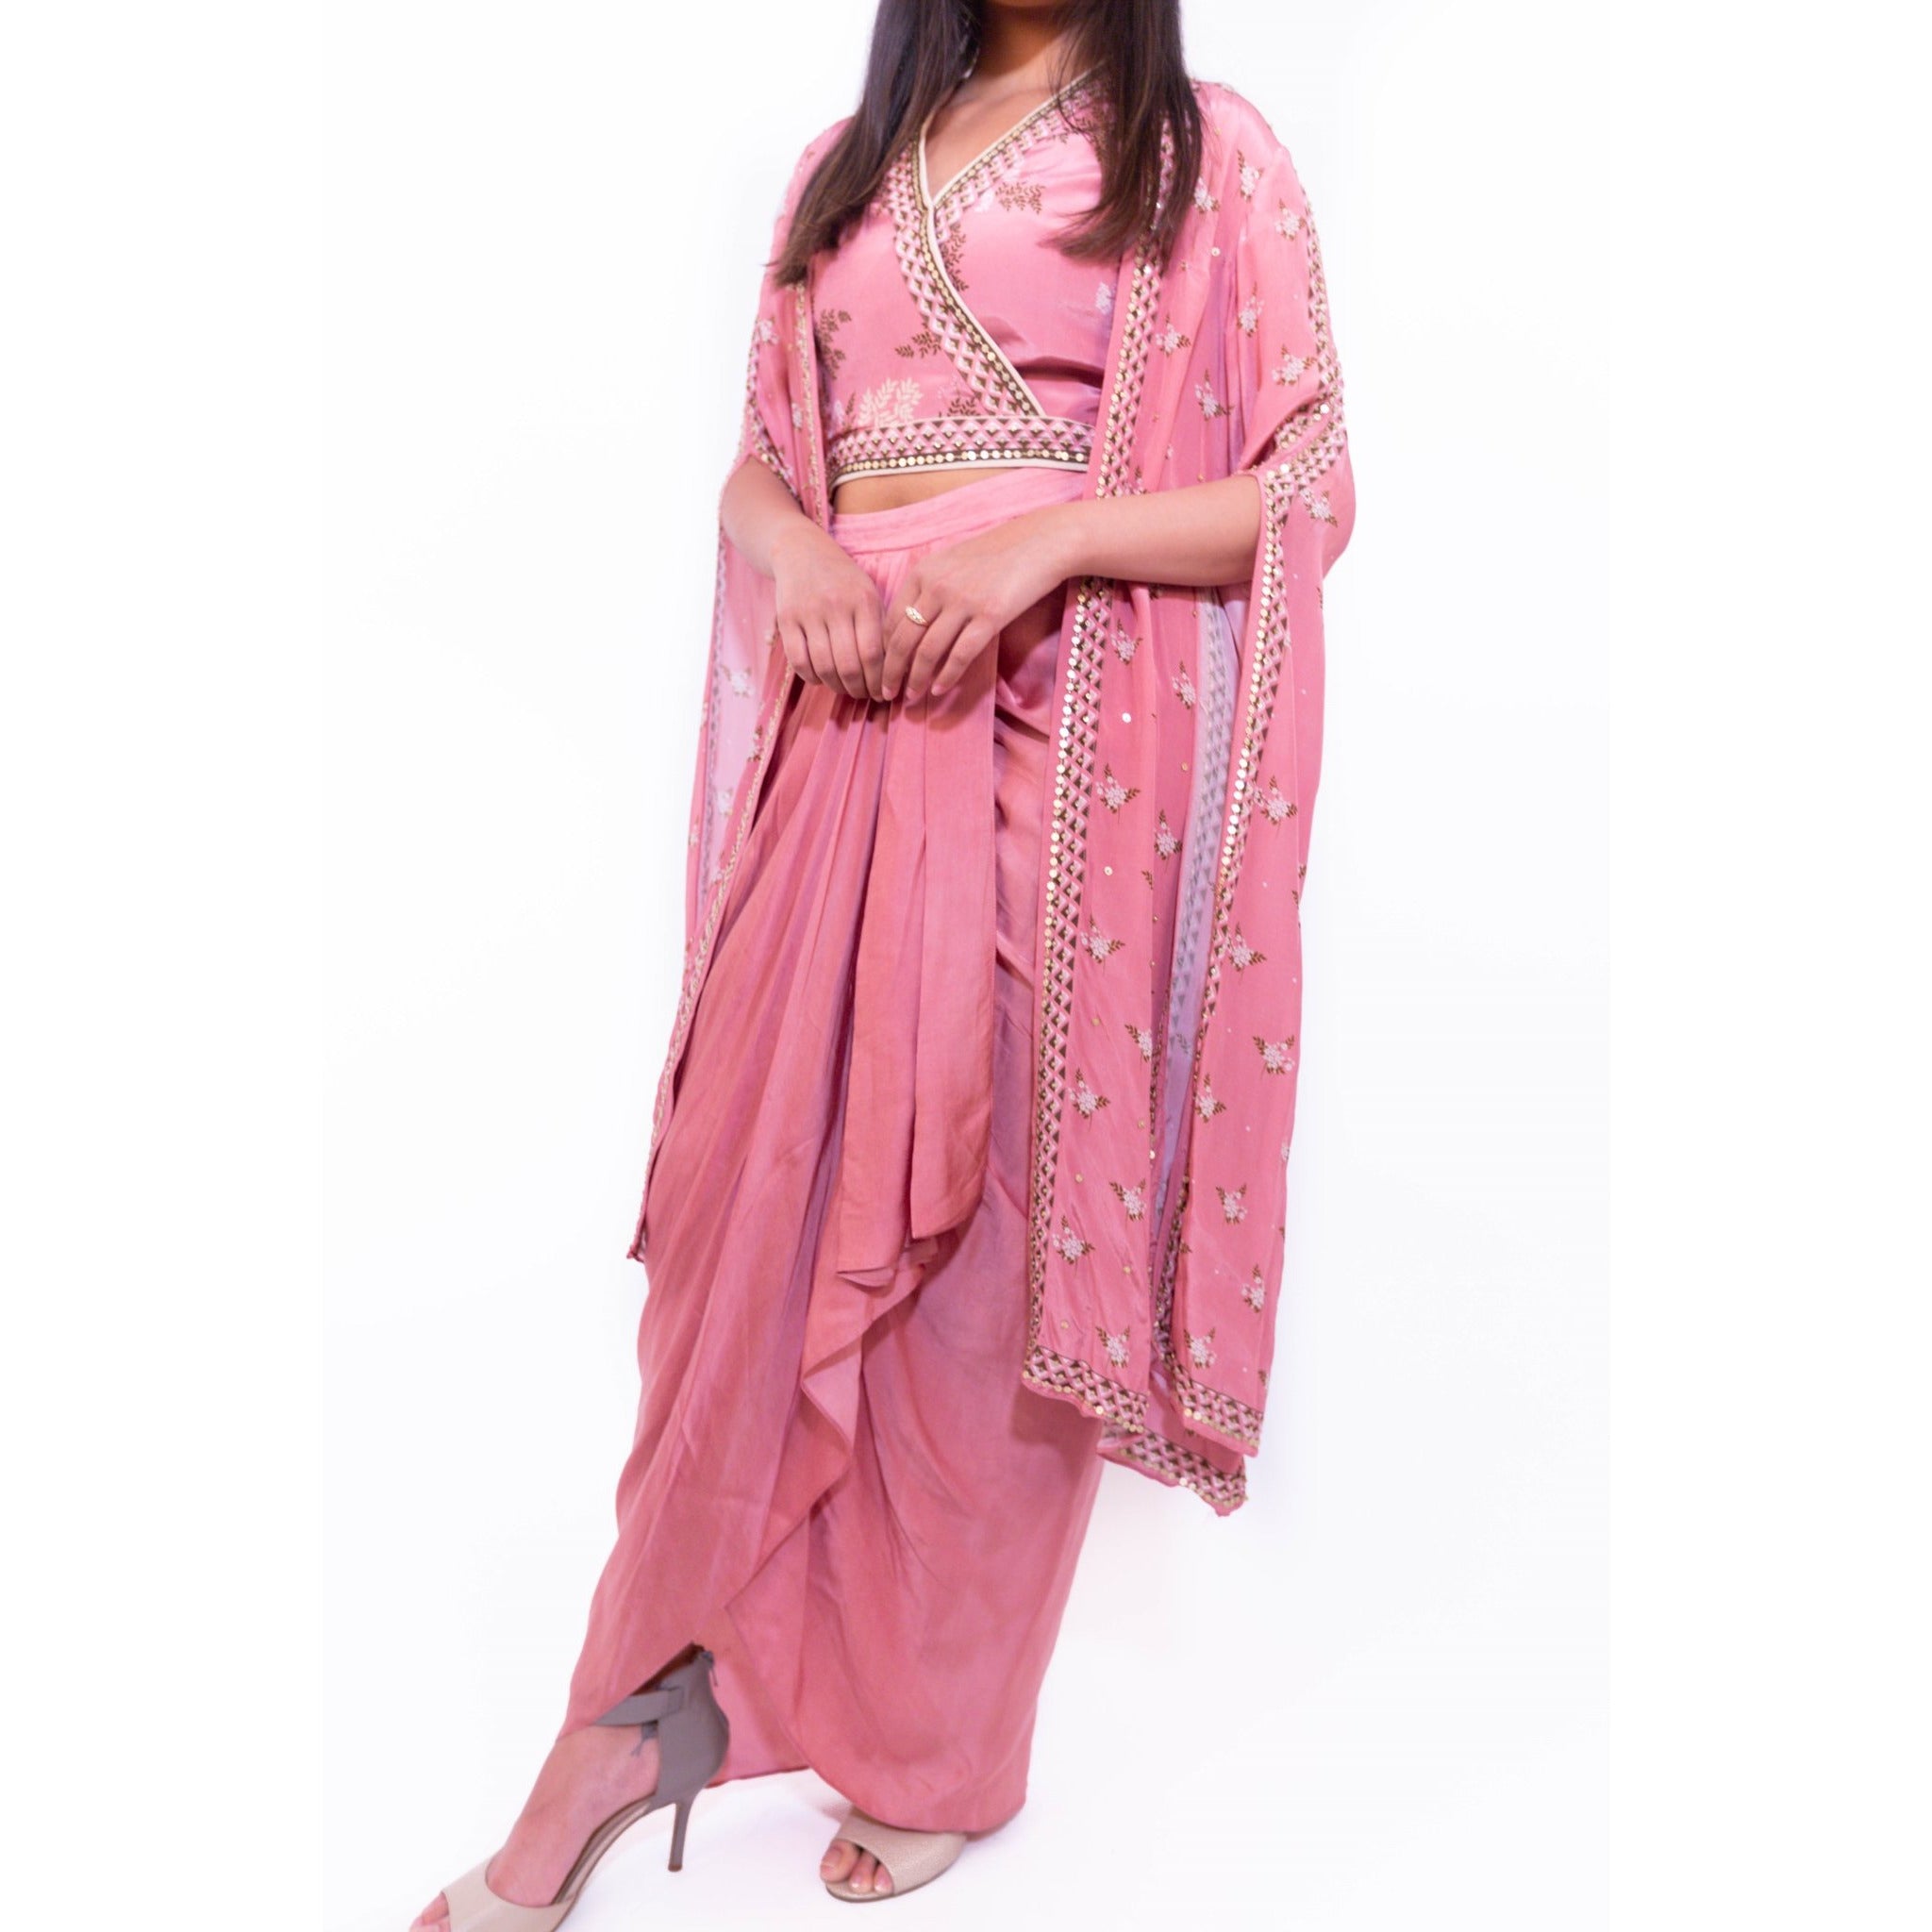 Crepe pink bustier, jacket and dhoti by Nirmoha Fashion House